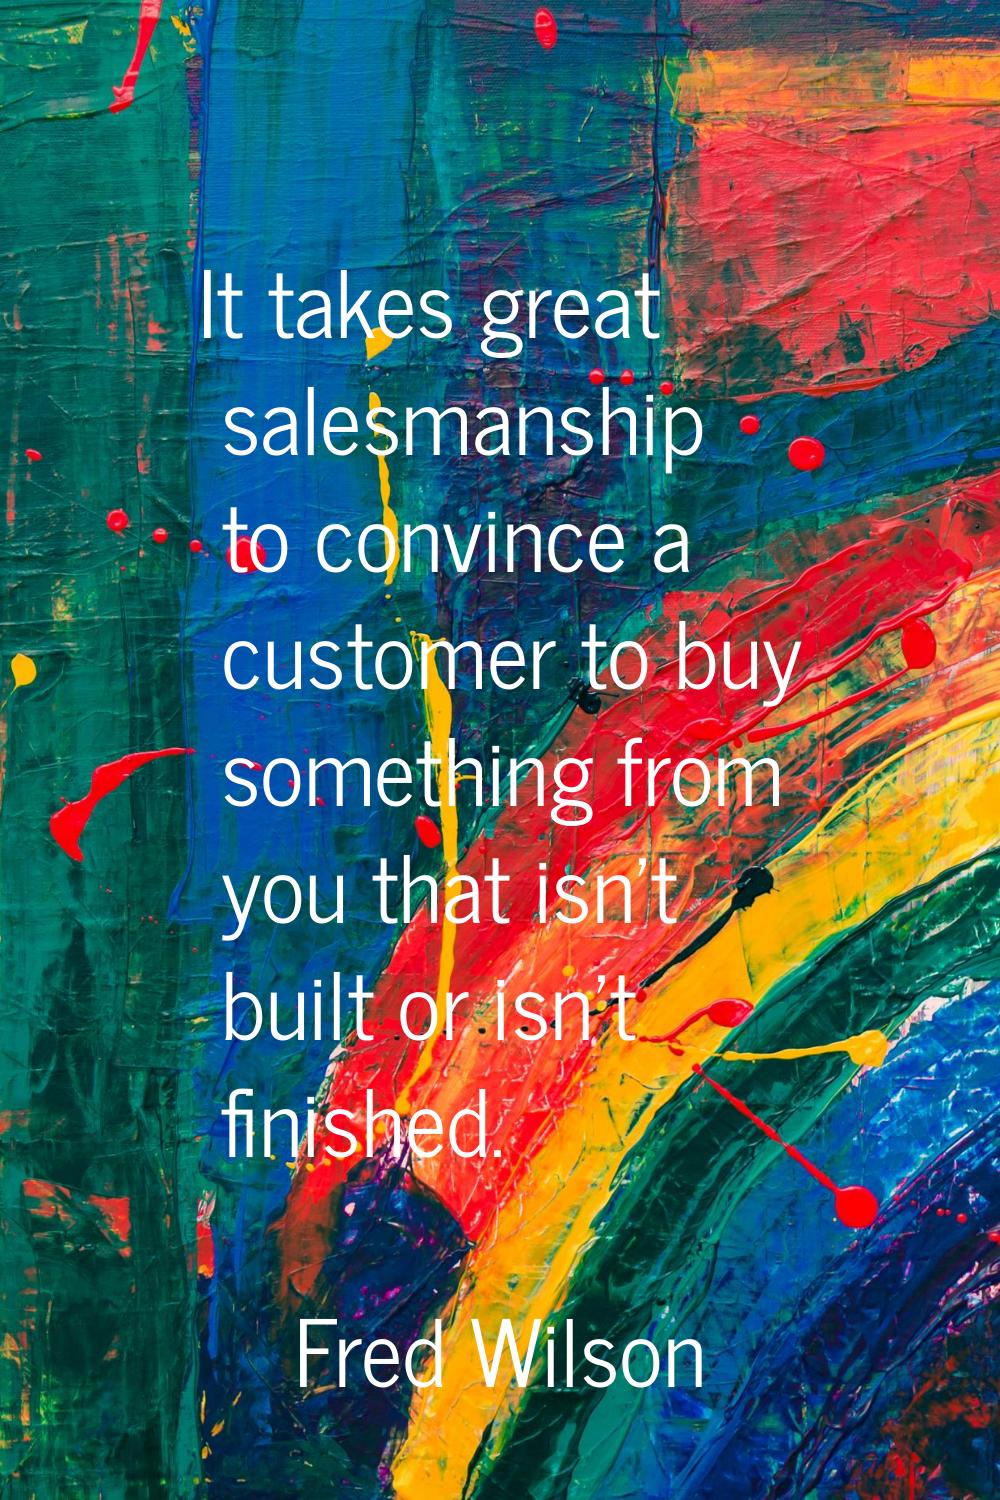 It takes great salesmanship to convince a customer to buy something from you that isn't built or is